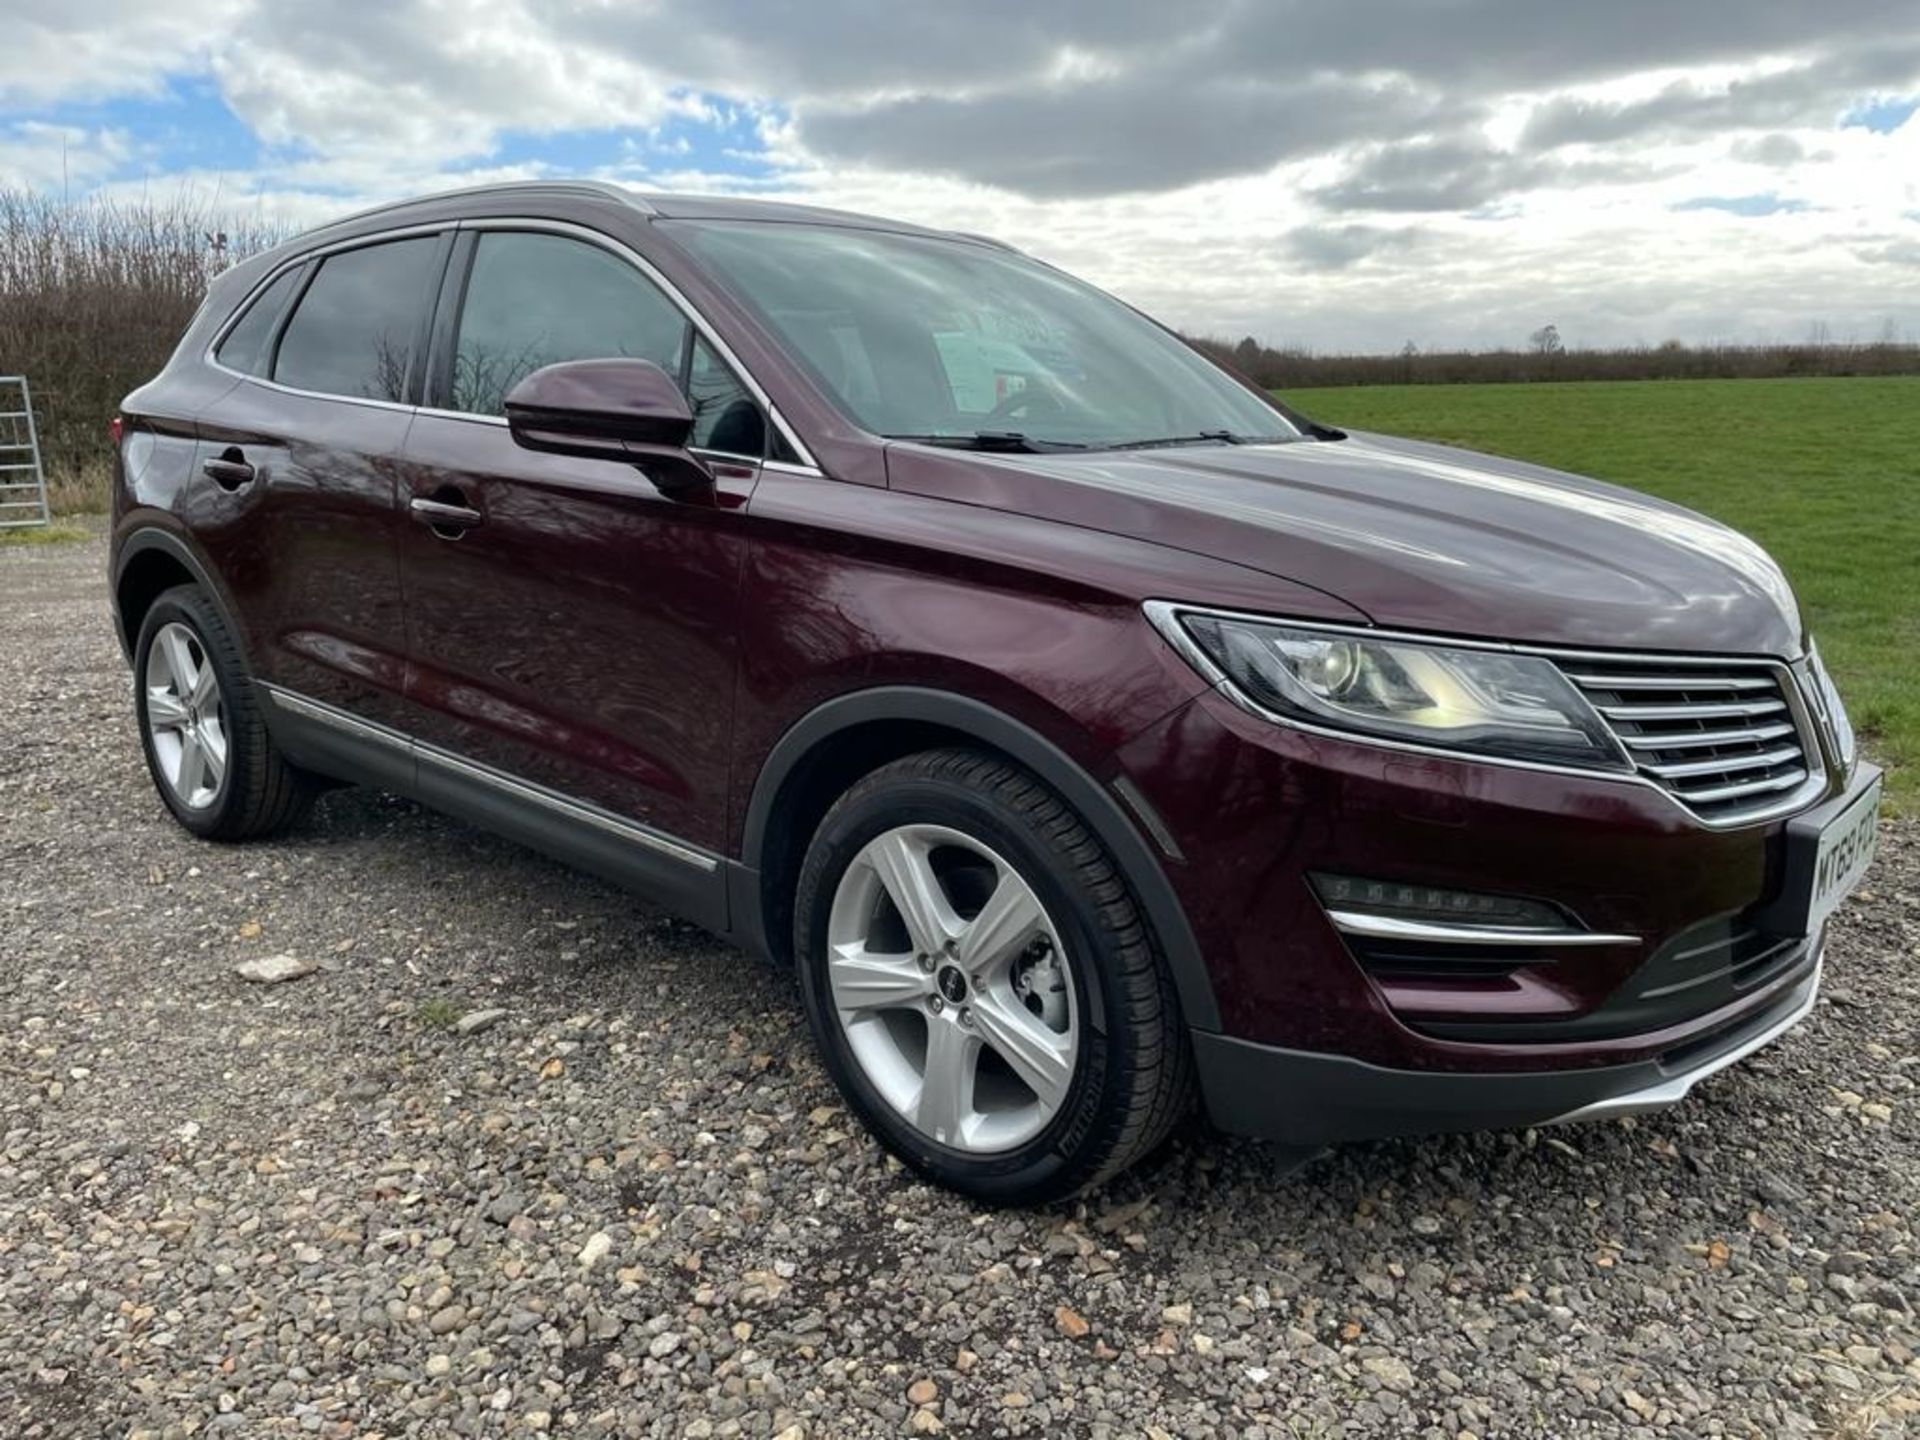 69 PLATE, PRE-REGISTERED 2017MY, LINCOLN MKC PREMIER 2.0L TURBO PETROL ECOBOOST (200bhp) AUTOMATIC